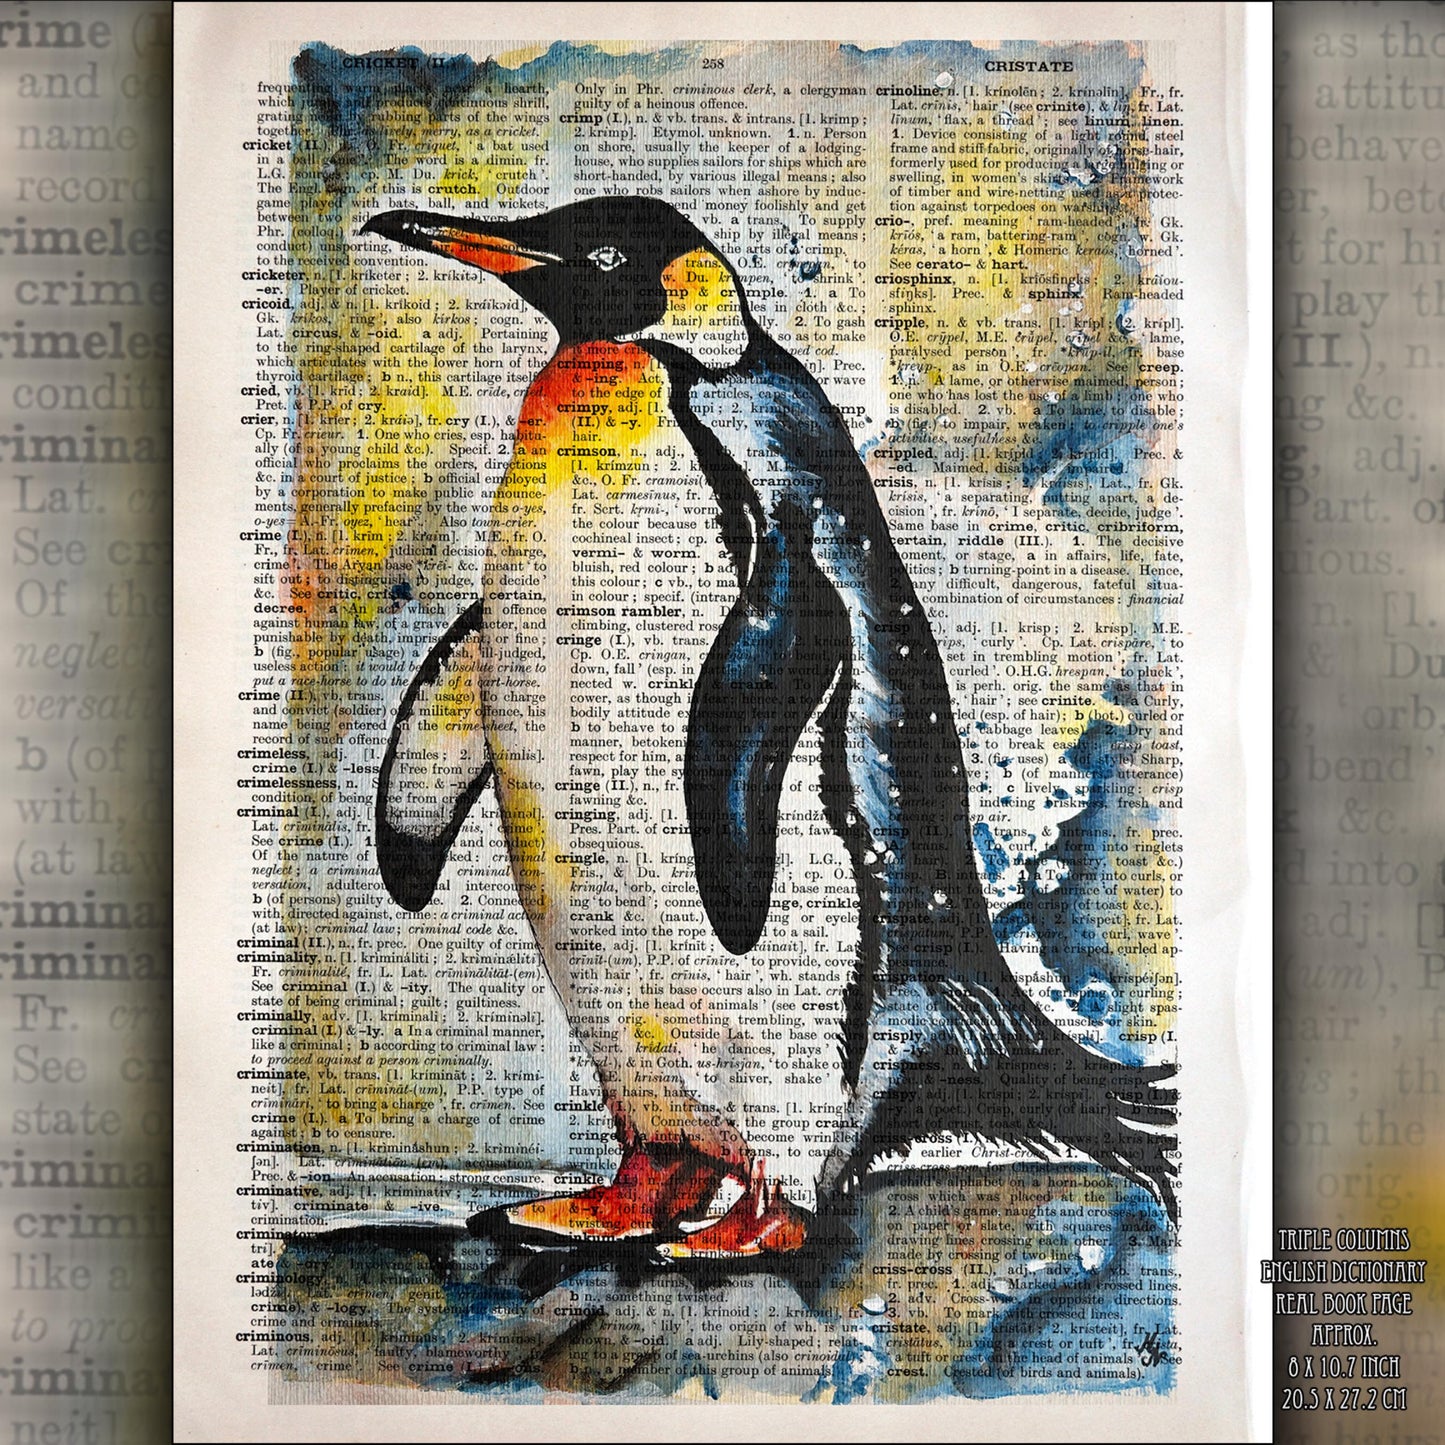 "The Penguin" features a digital art piece crafted on an upcycled vintage English dictionary page.